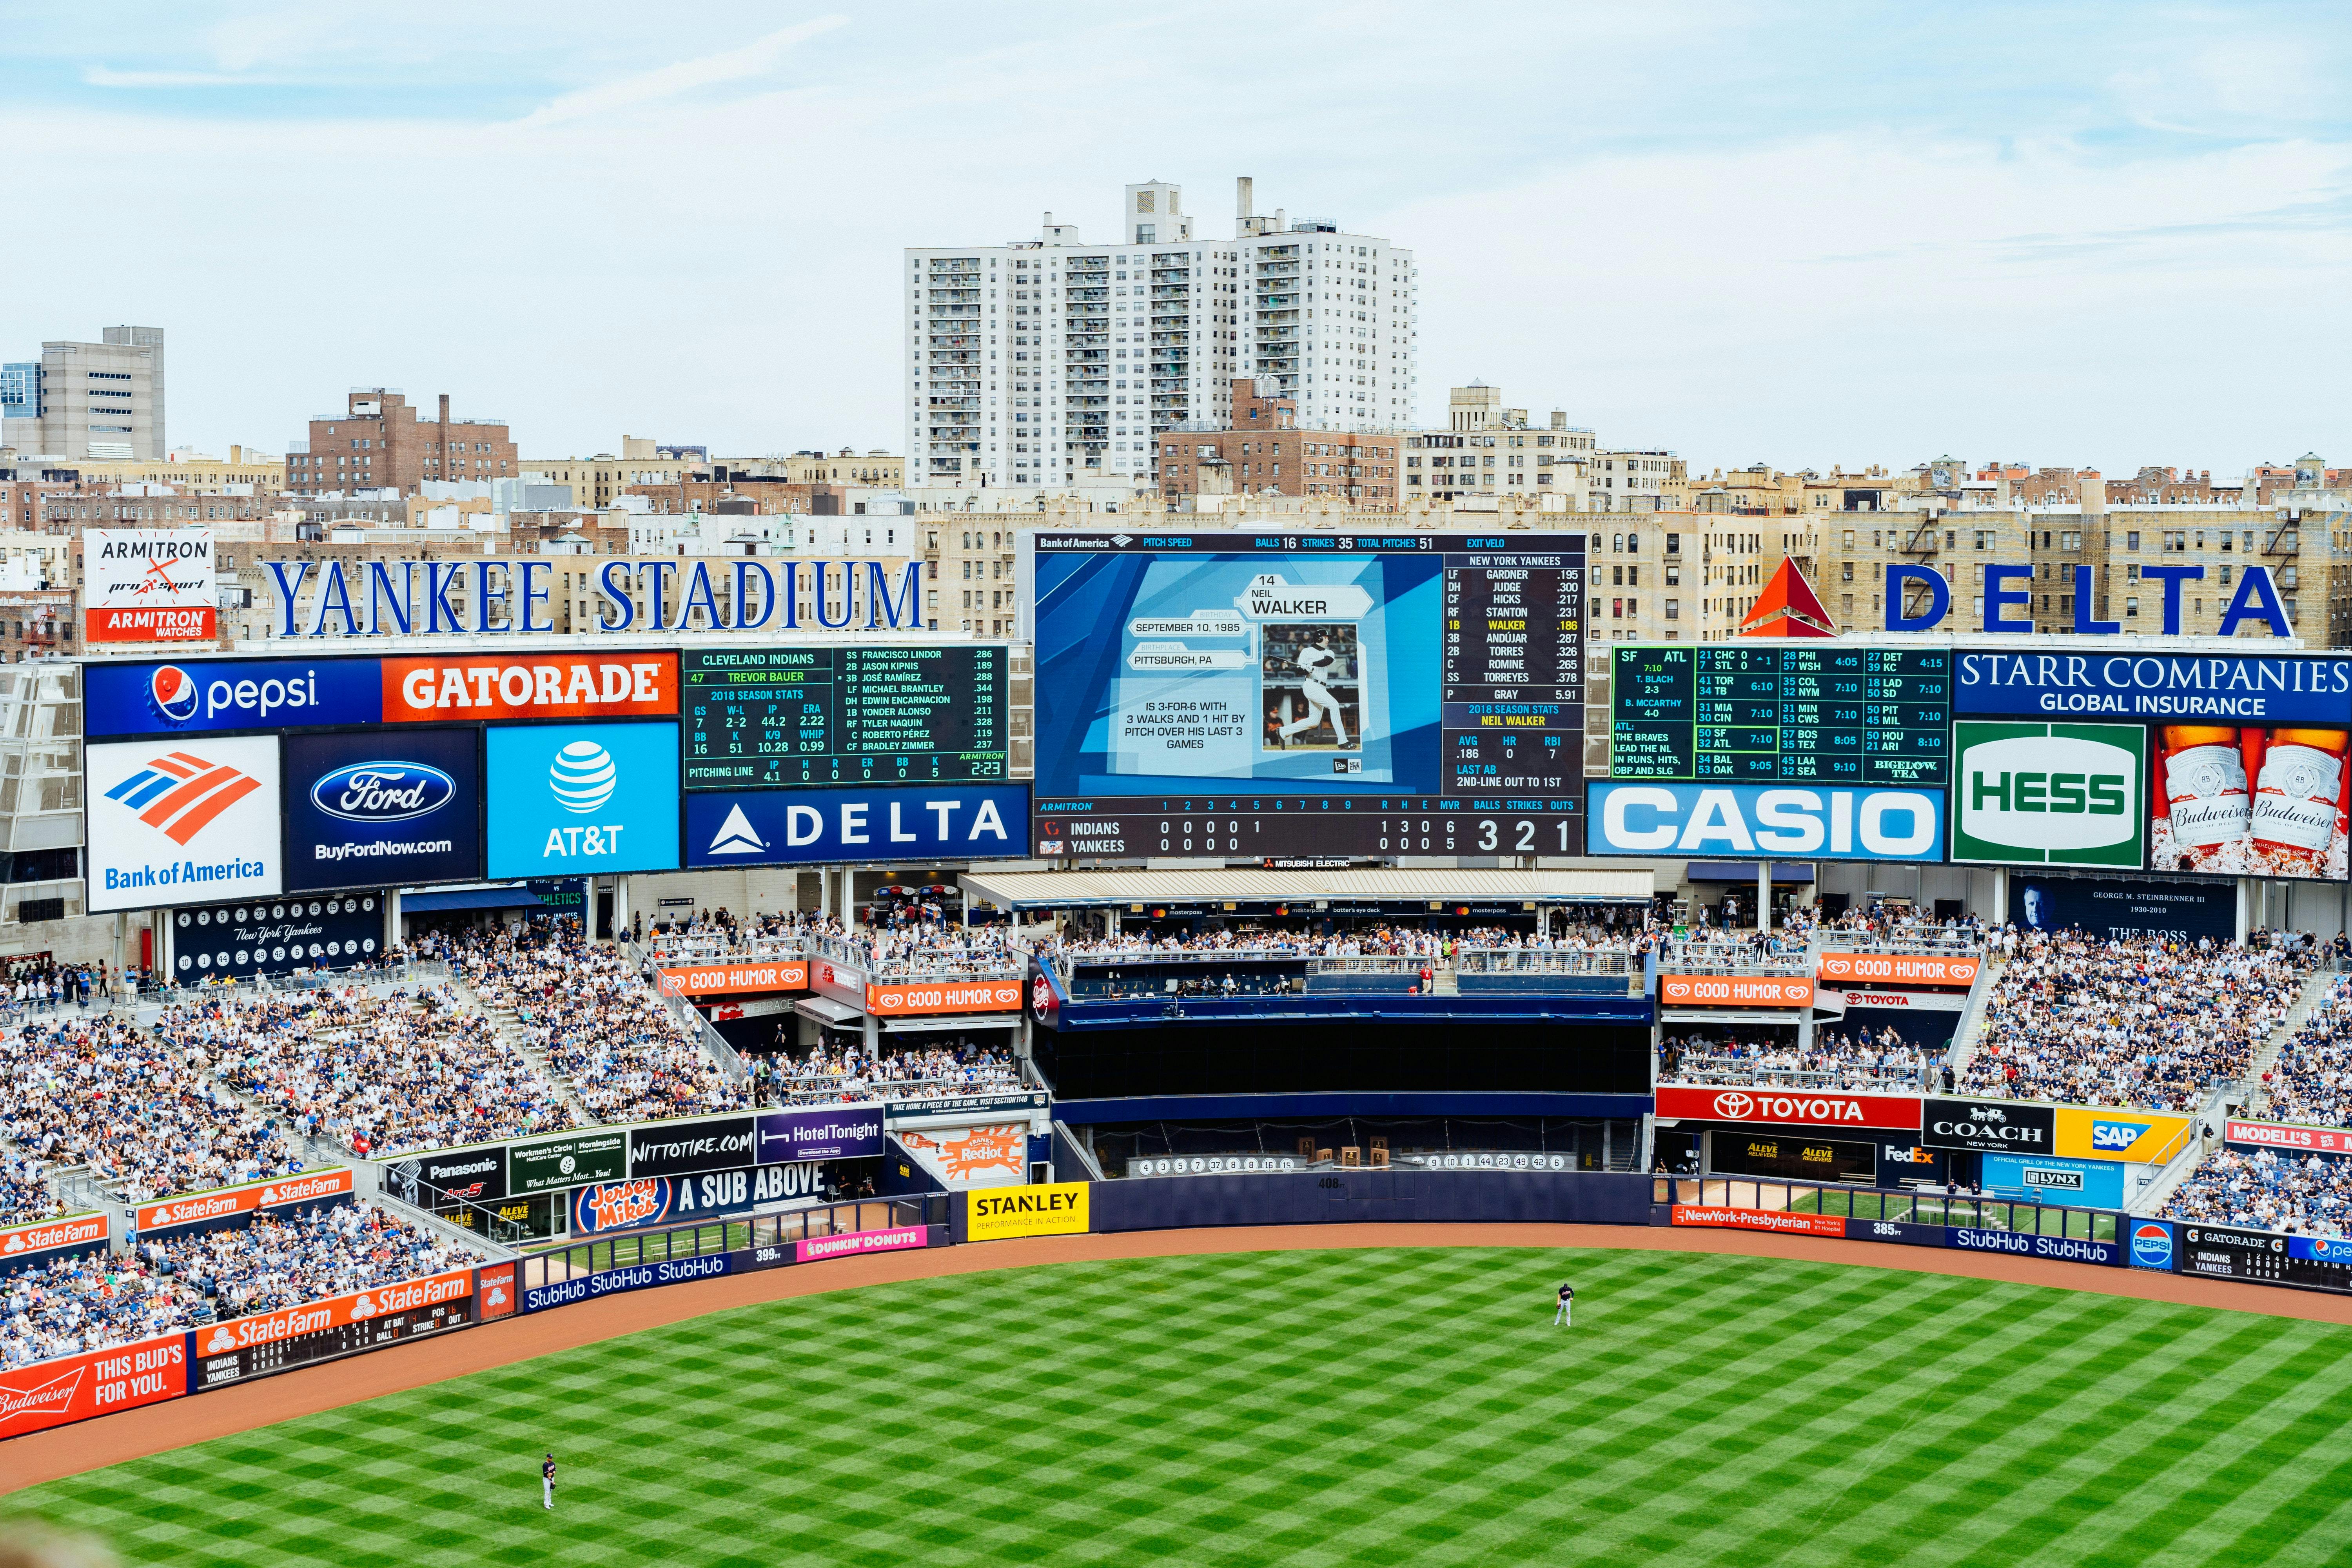 Luggage Storage Yankee Stadium - 24/7 - From $0.95/hour or $5.95/day